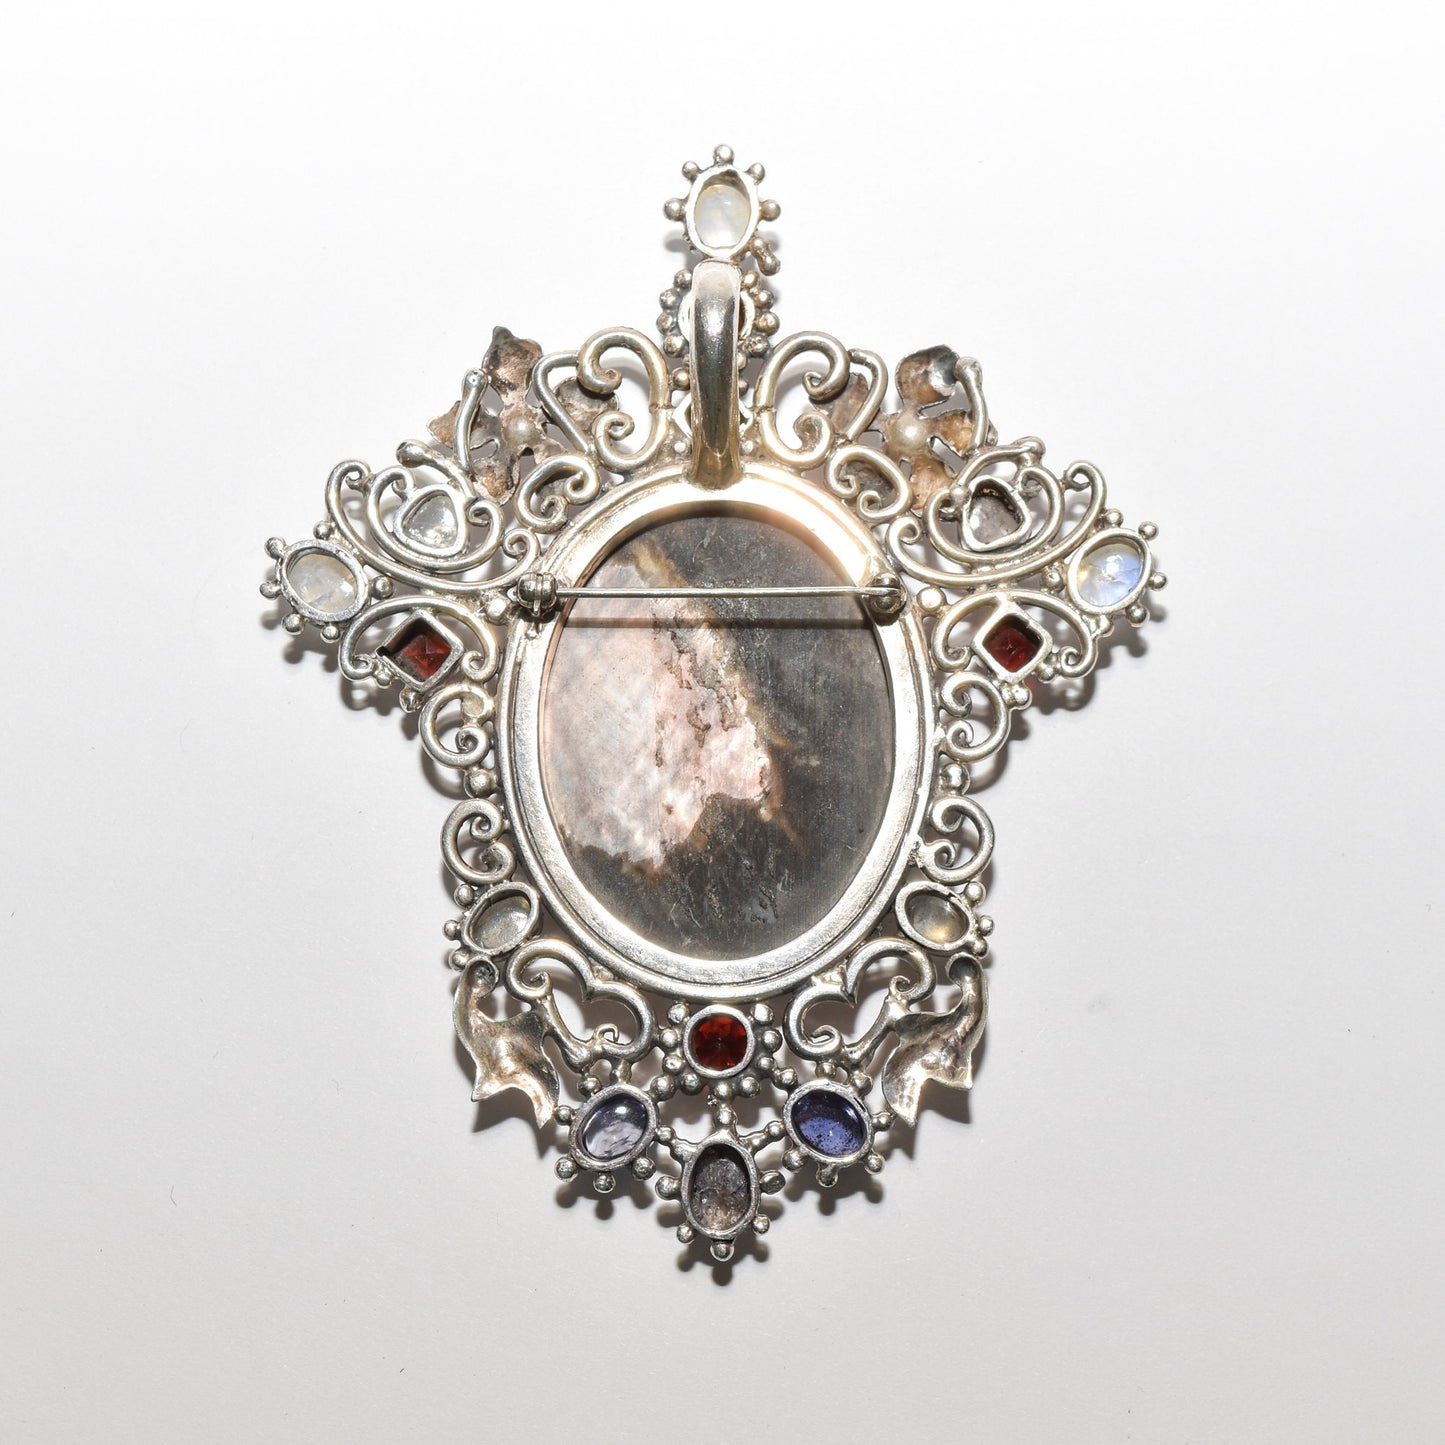 Victorian style sterling silver cameo pendant brooch with multiple gemstones and ornate design, measuring 4 inches in length.